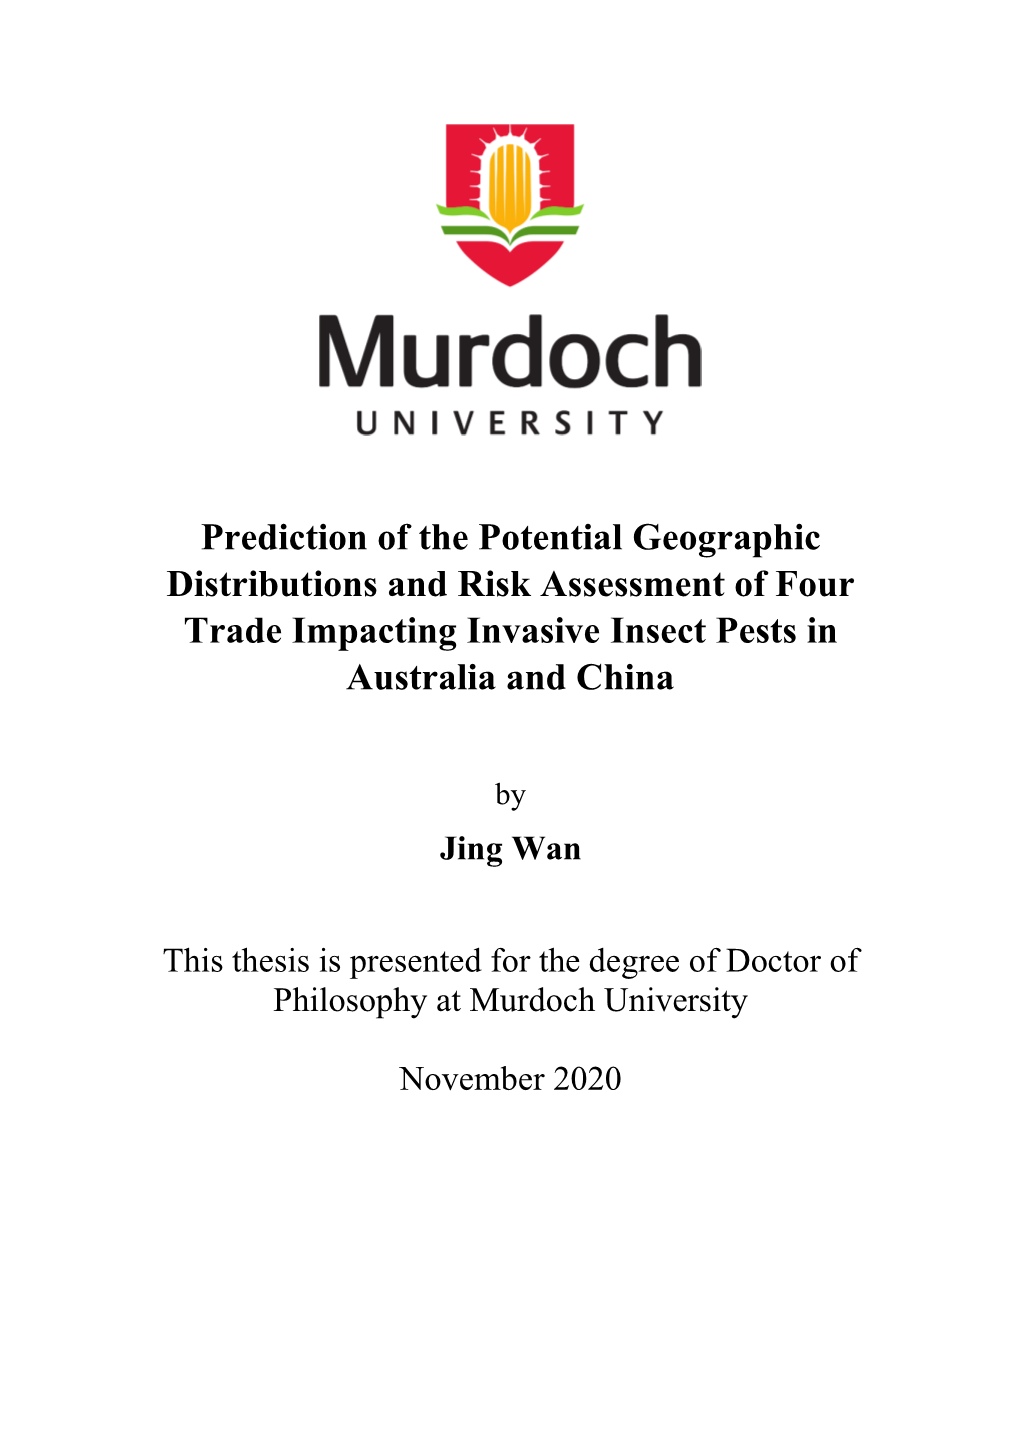 Prediction of the Potential Geographic Distributions and Risk Assessment of Four Trade Impacting Invasive Insect Pests in Australia and China